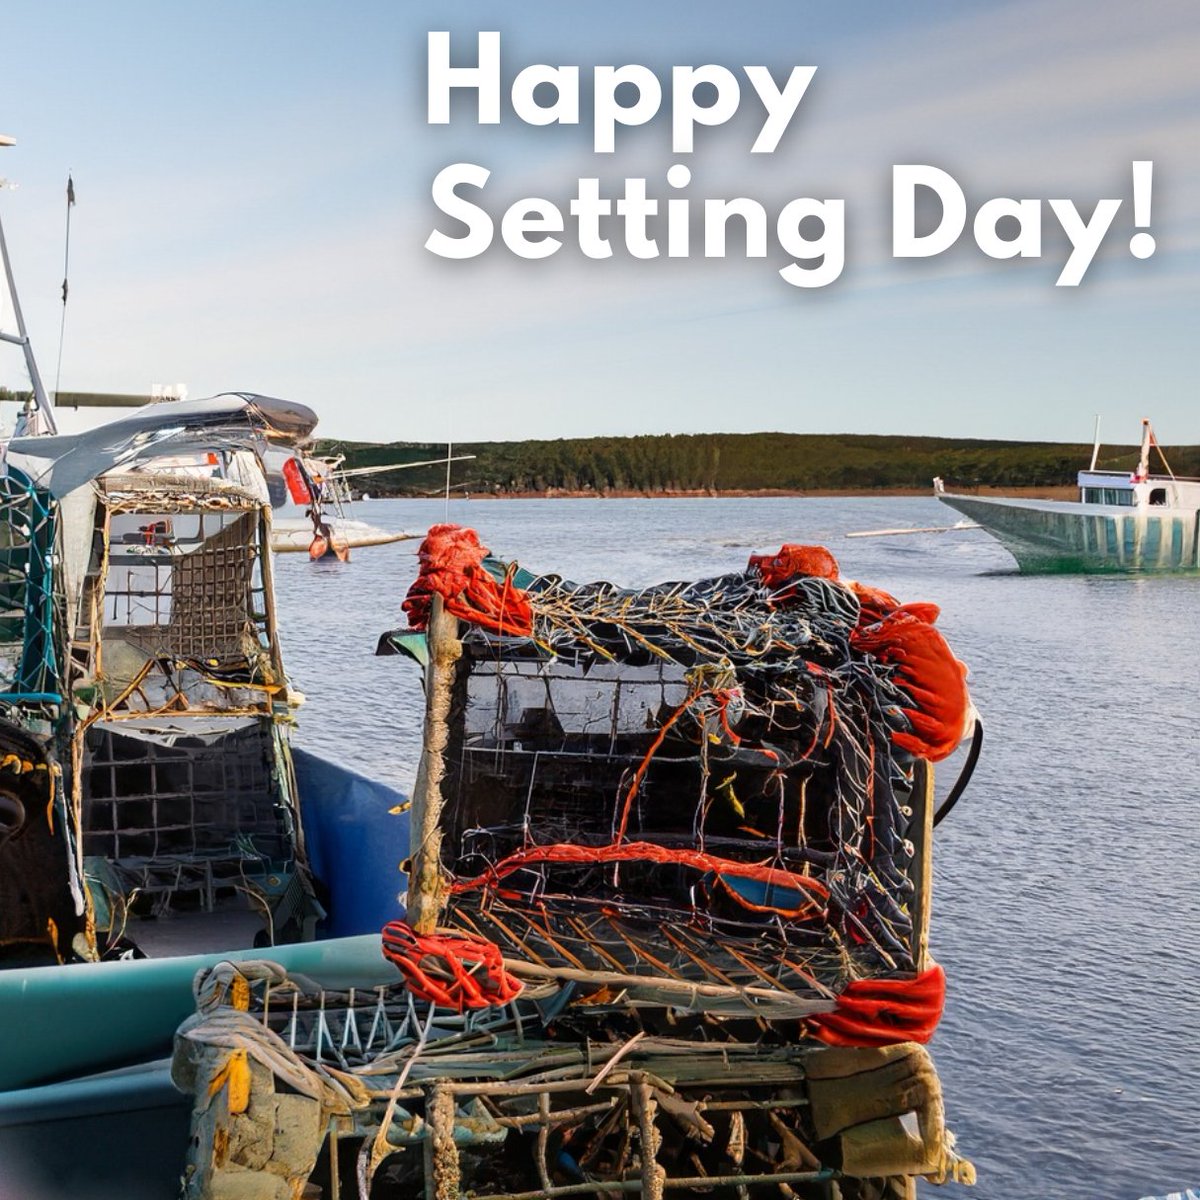 It's official - setting day has arrived in PEI!  Today marks the start of the spring lobster fishing season on the island's South Shore.  Join us in celebrating this exciting event and the hardworking folks who make it all possible. #SettingDay2023 #PEILobsterSeason #FreshSeafood